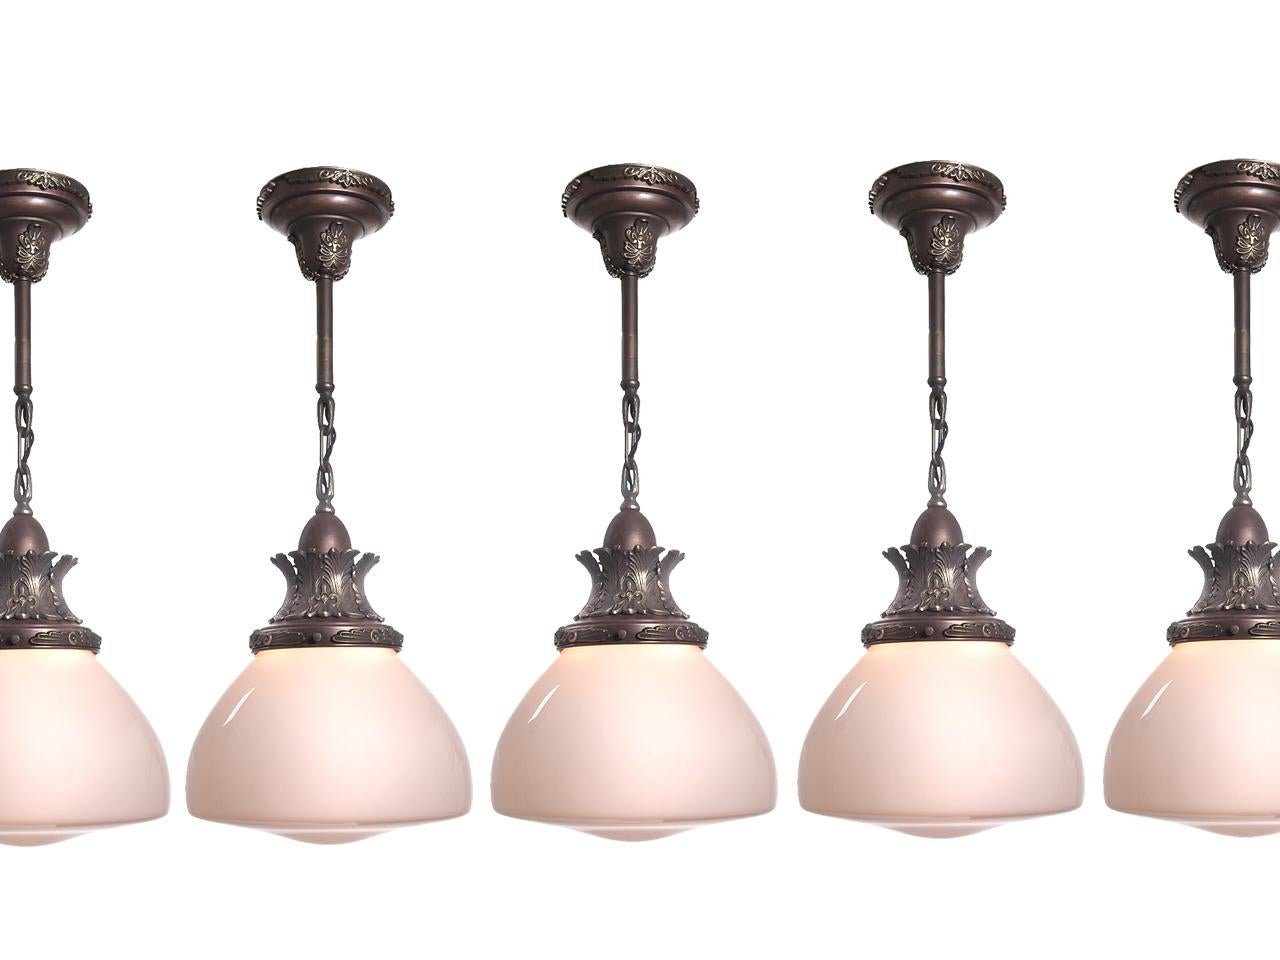 These globes and fixtures are really nice originals and we have a good collection of them. The closed bell shaped domes are very unique and the tops have a rich two-tone cast crown and matching canopy. We priced these per lamo so you can buy just